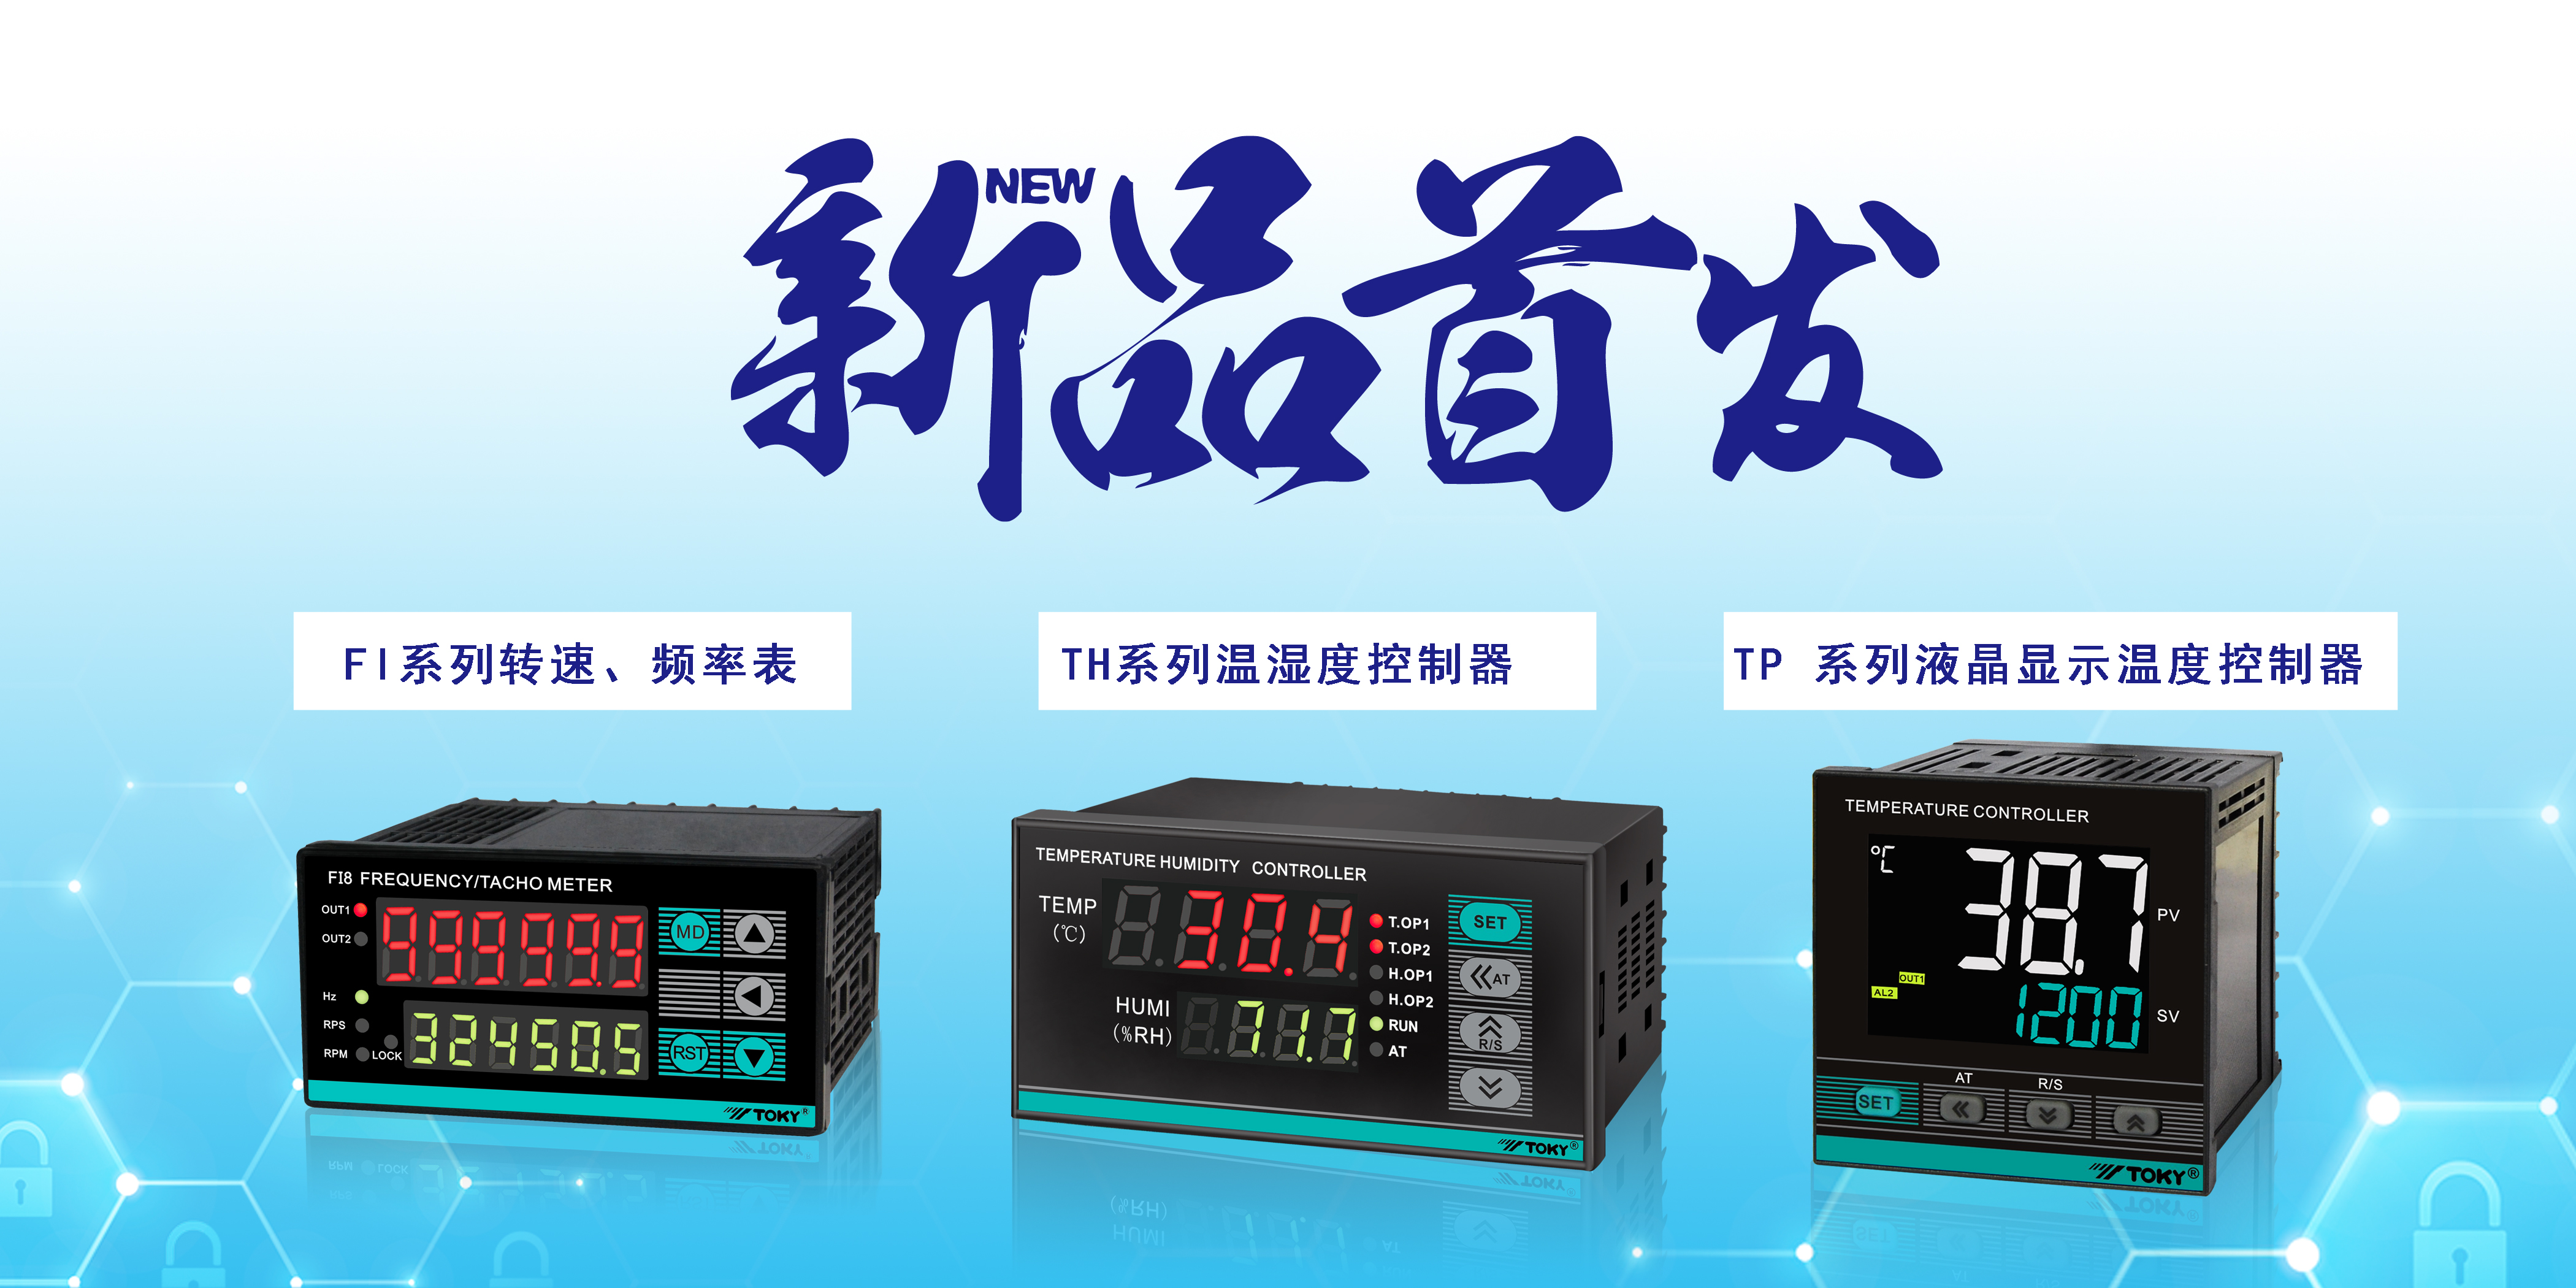 Guangdong Dongqi series new products released